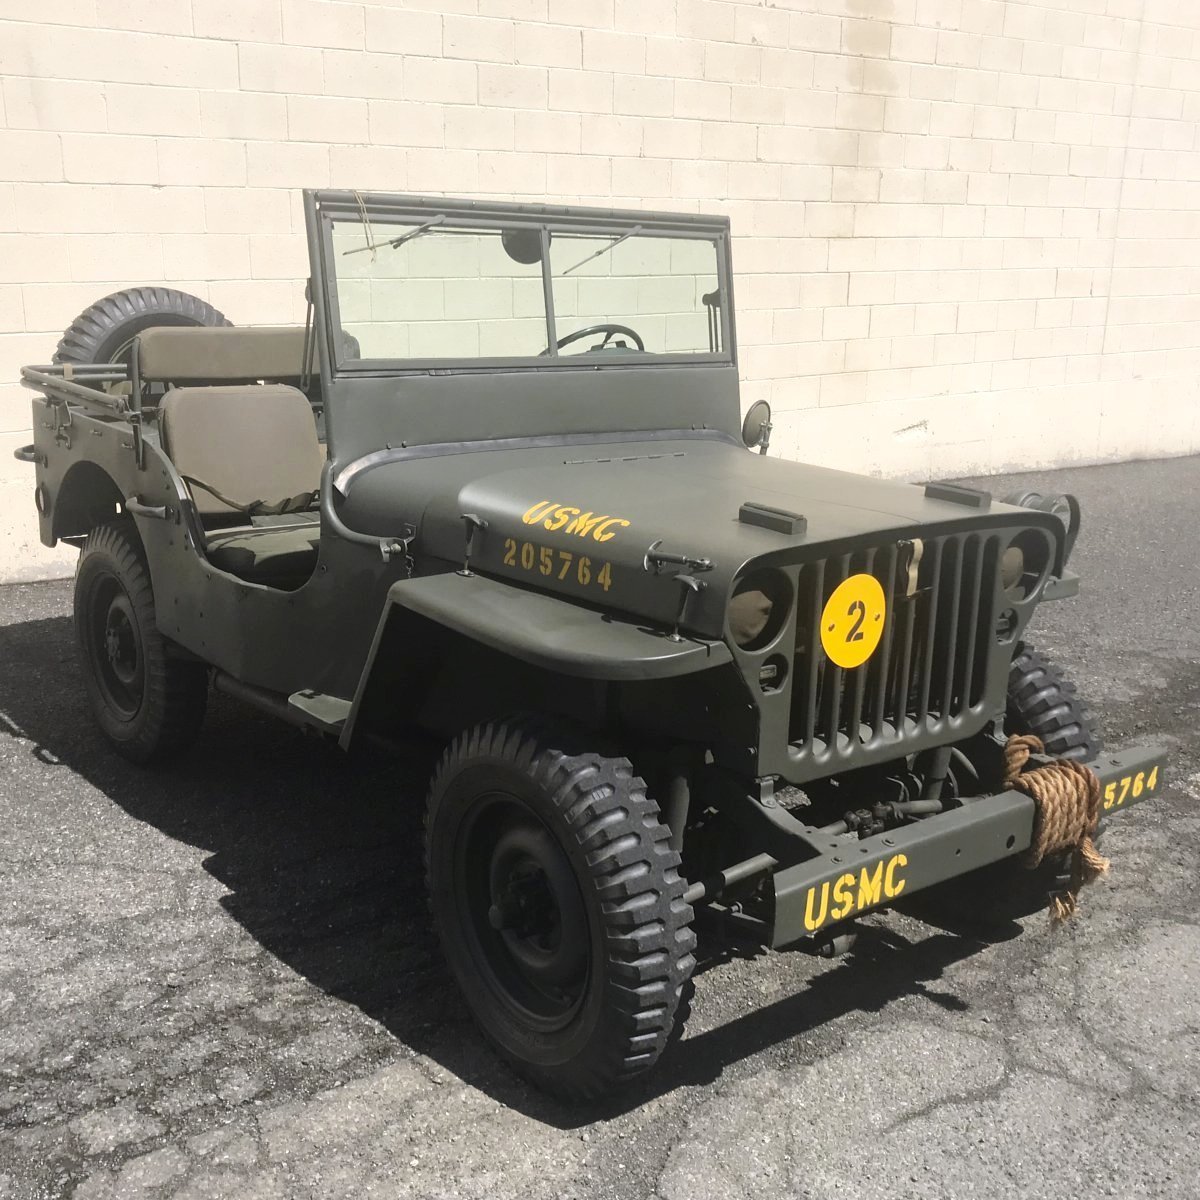 Willys Jeep Serial Number Location